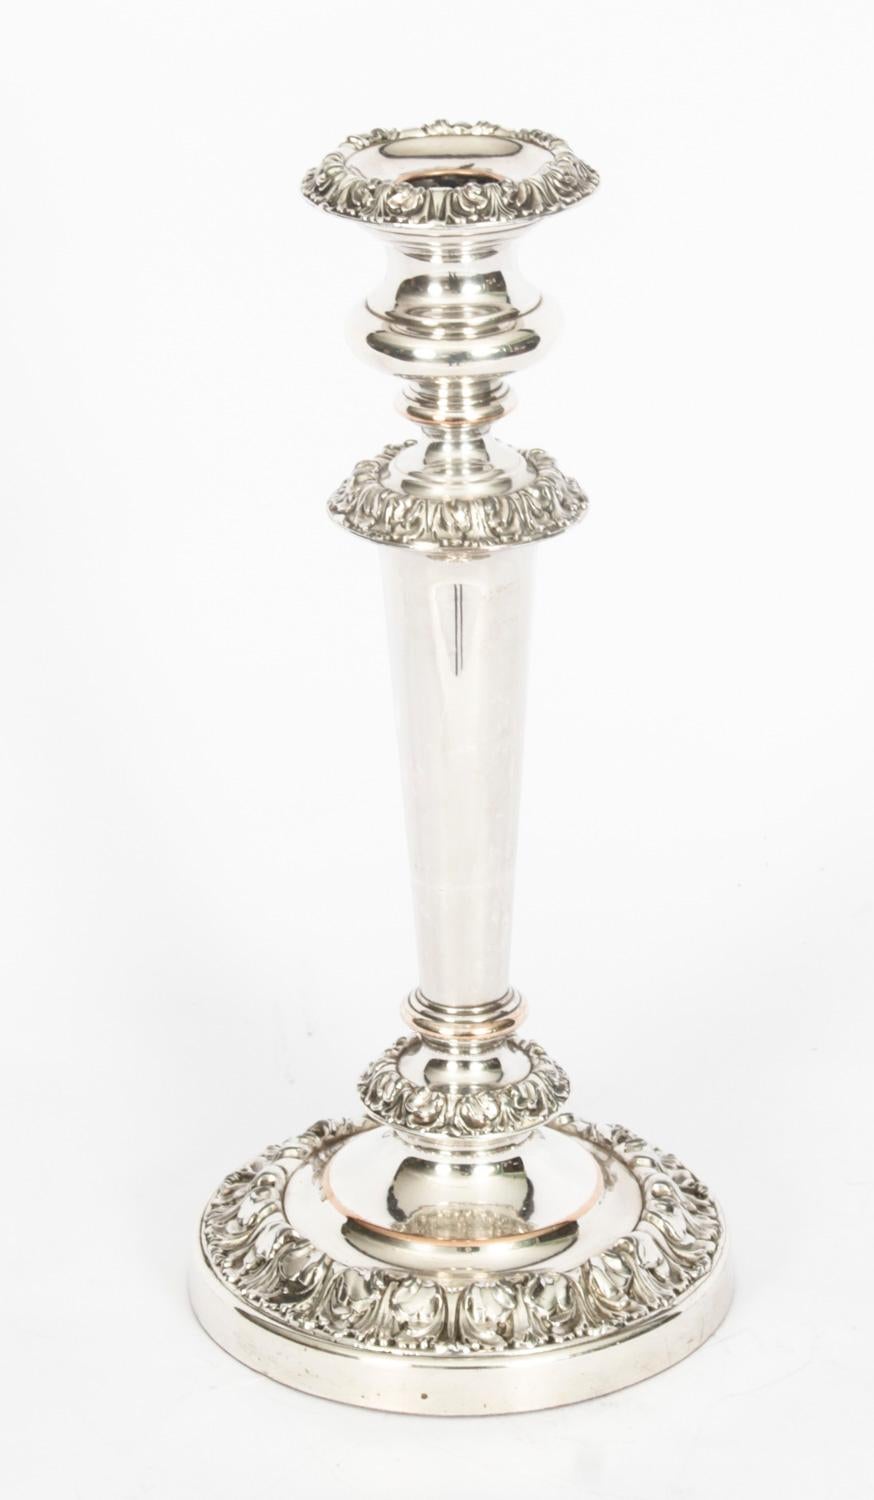 This is an exquisite set of four antique English Old Sheffield plate candlesticks, circa 1820 in date.

They feature exquisite classical decoration, are silver on copper and in excellent condition.
 
Condition:
In excellent condition, please